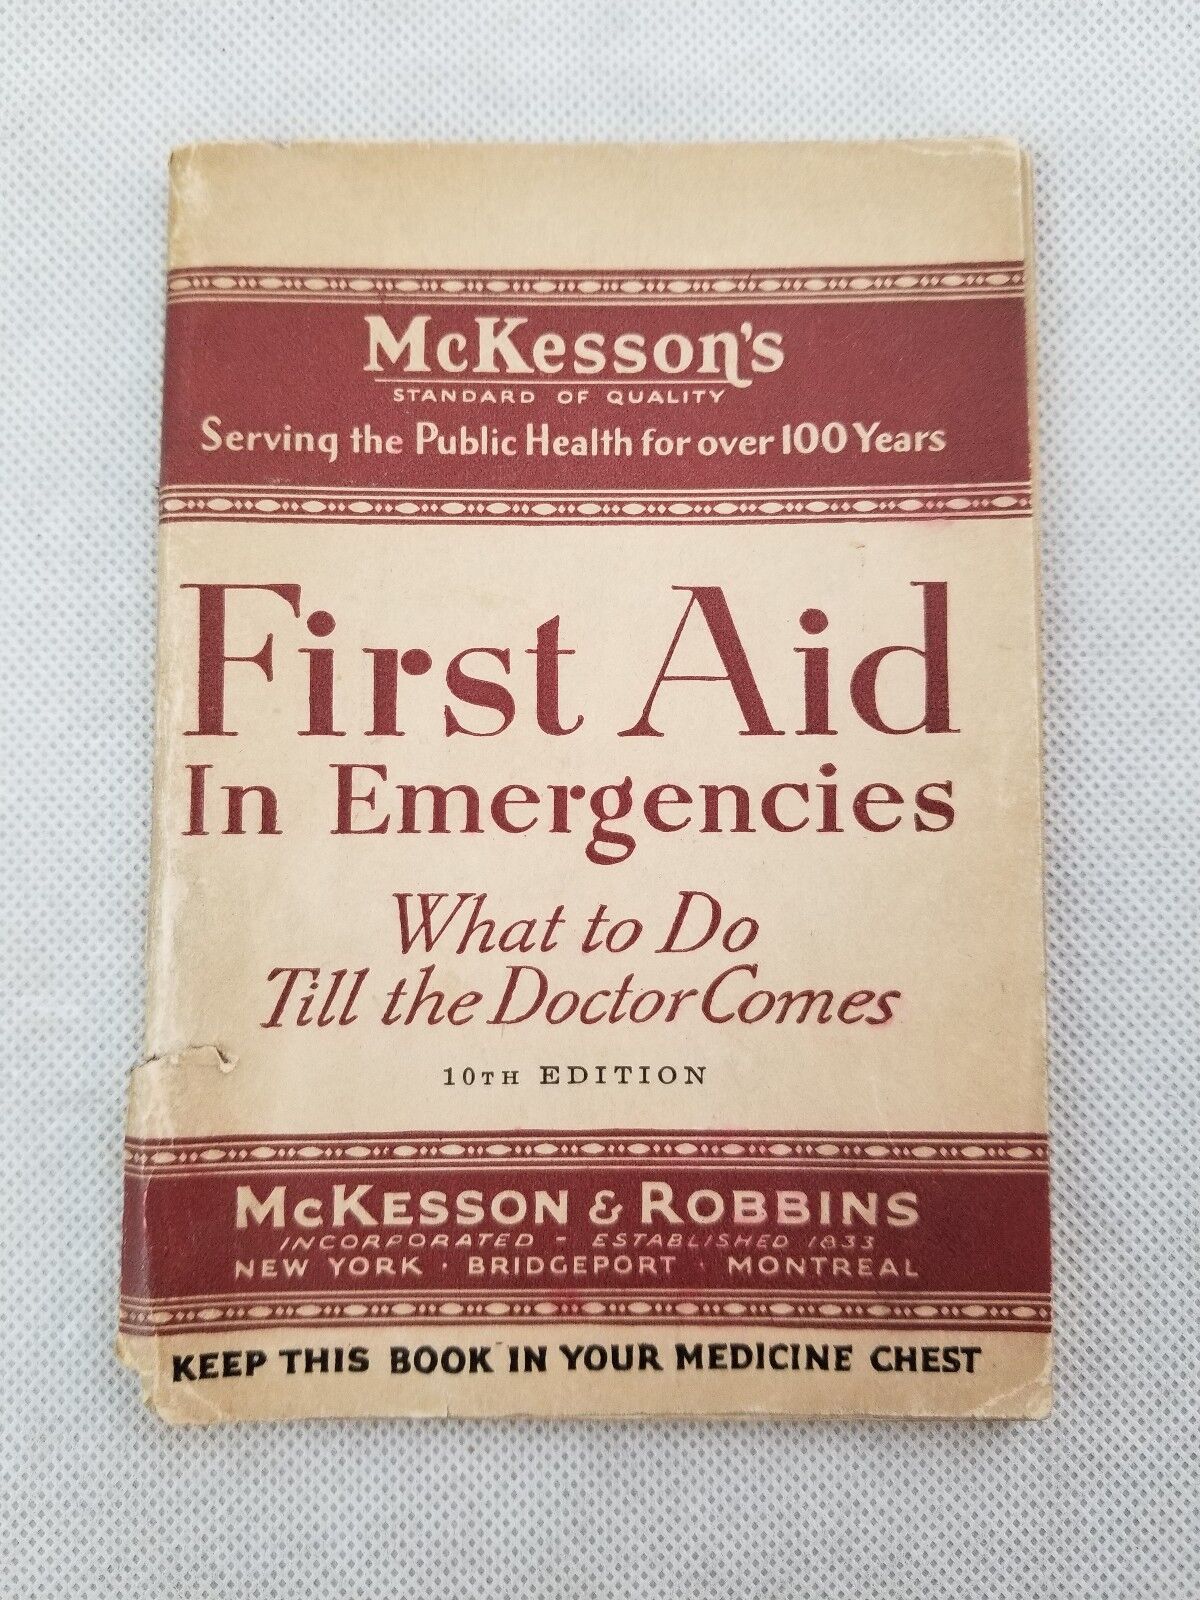 McKesson\'s First Aid In Emergencies 10th Edition 1931 Medical Treatment P2